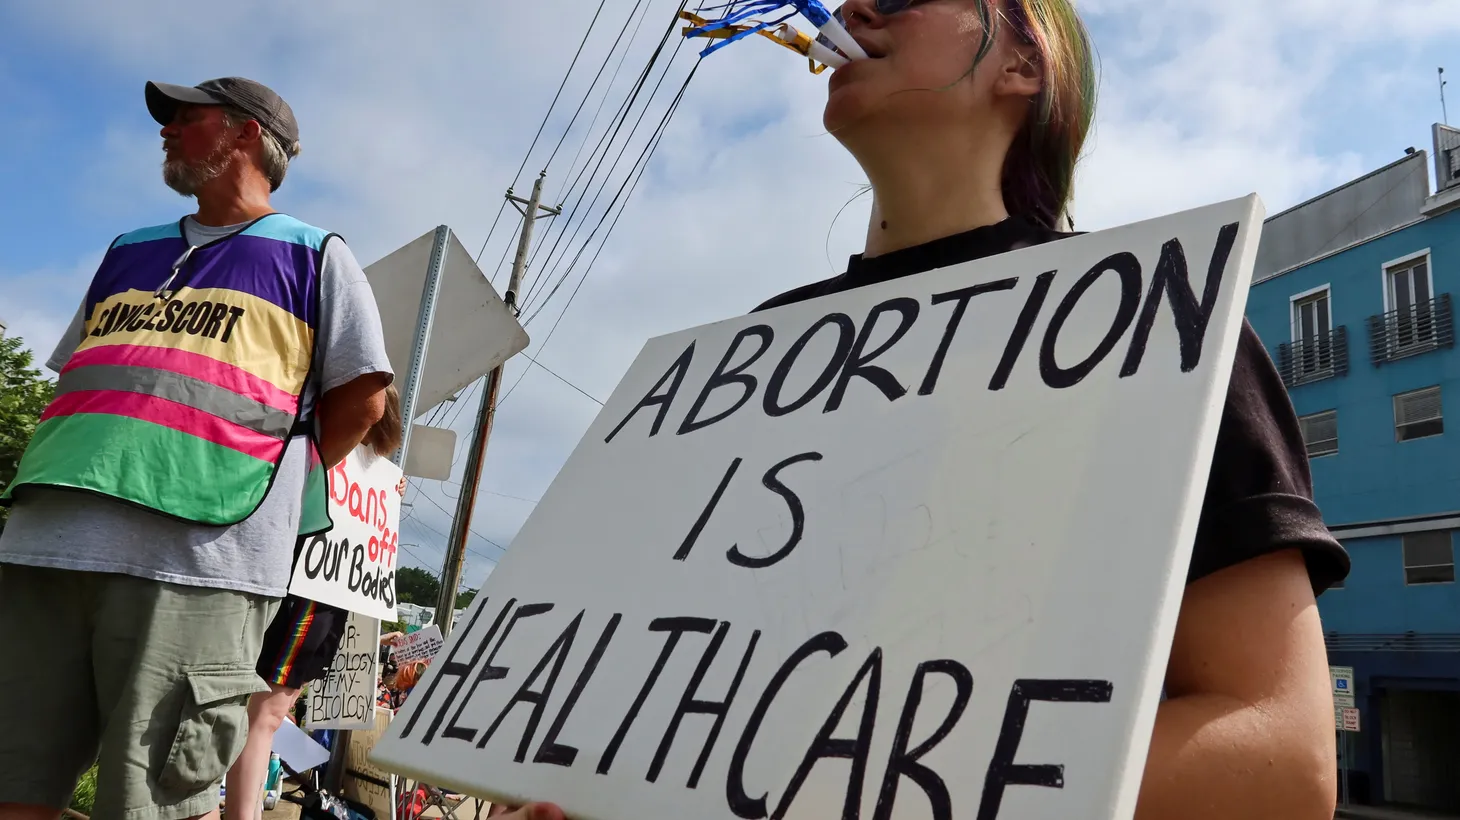 An abortion rights activist blows a horn outside the Jackson Women's Health Organization in Jackson, Mississippi, U.S. on July 6, 2022.